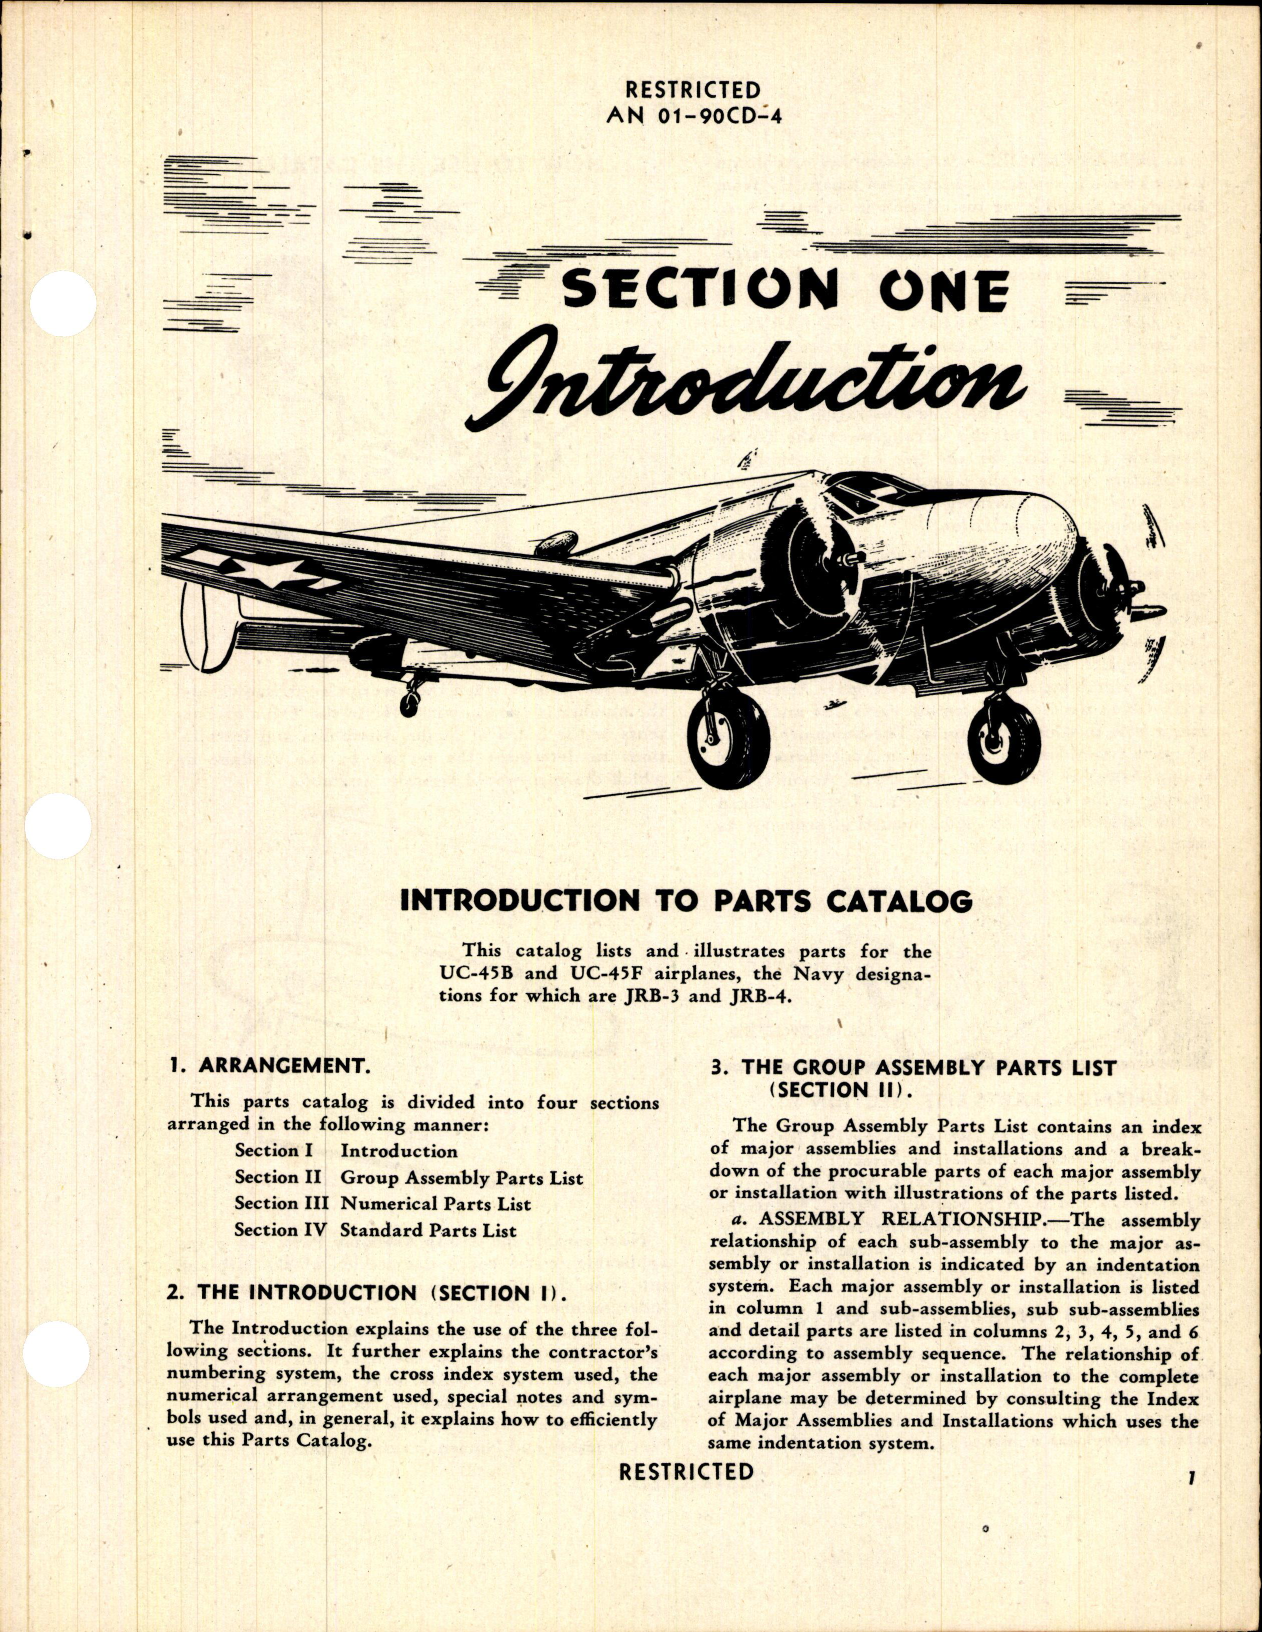 Sample page 7 from AirCorps Library document: Parts Catalog for UC-45B, UC-45F, JRB-3, and JRB-4